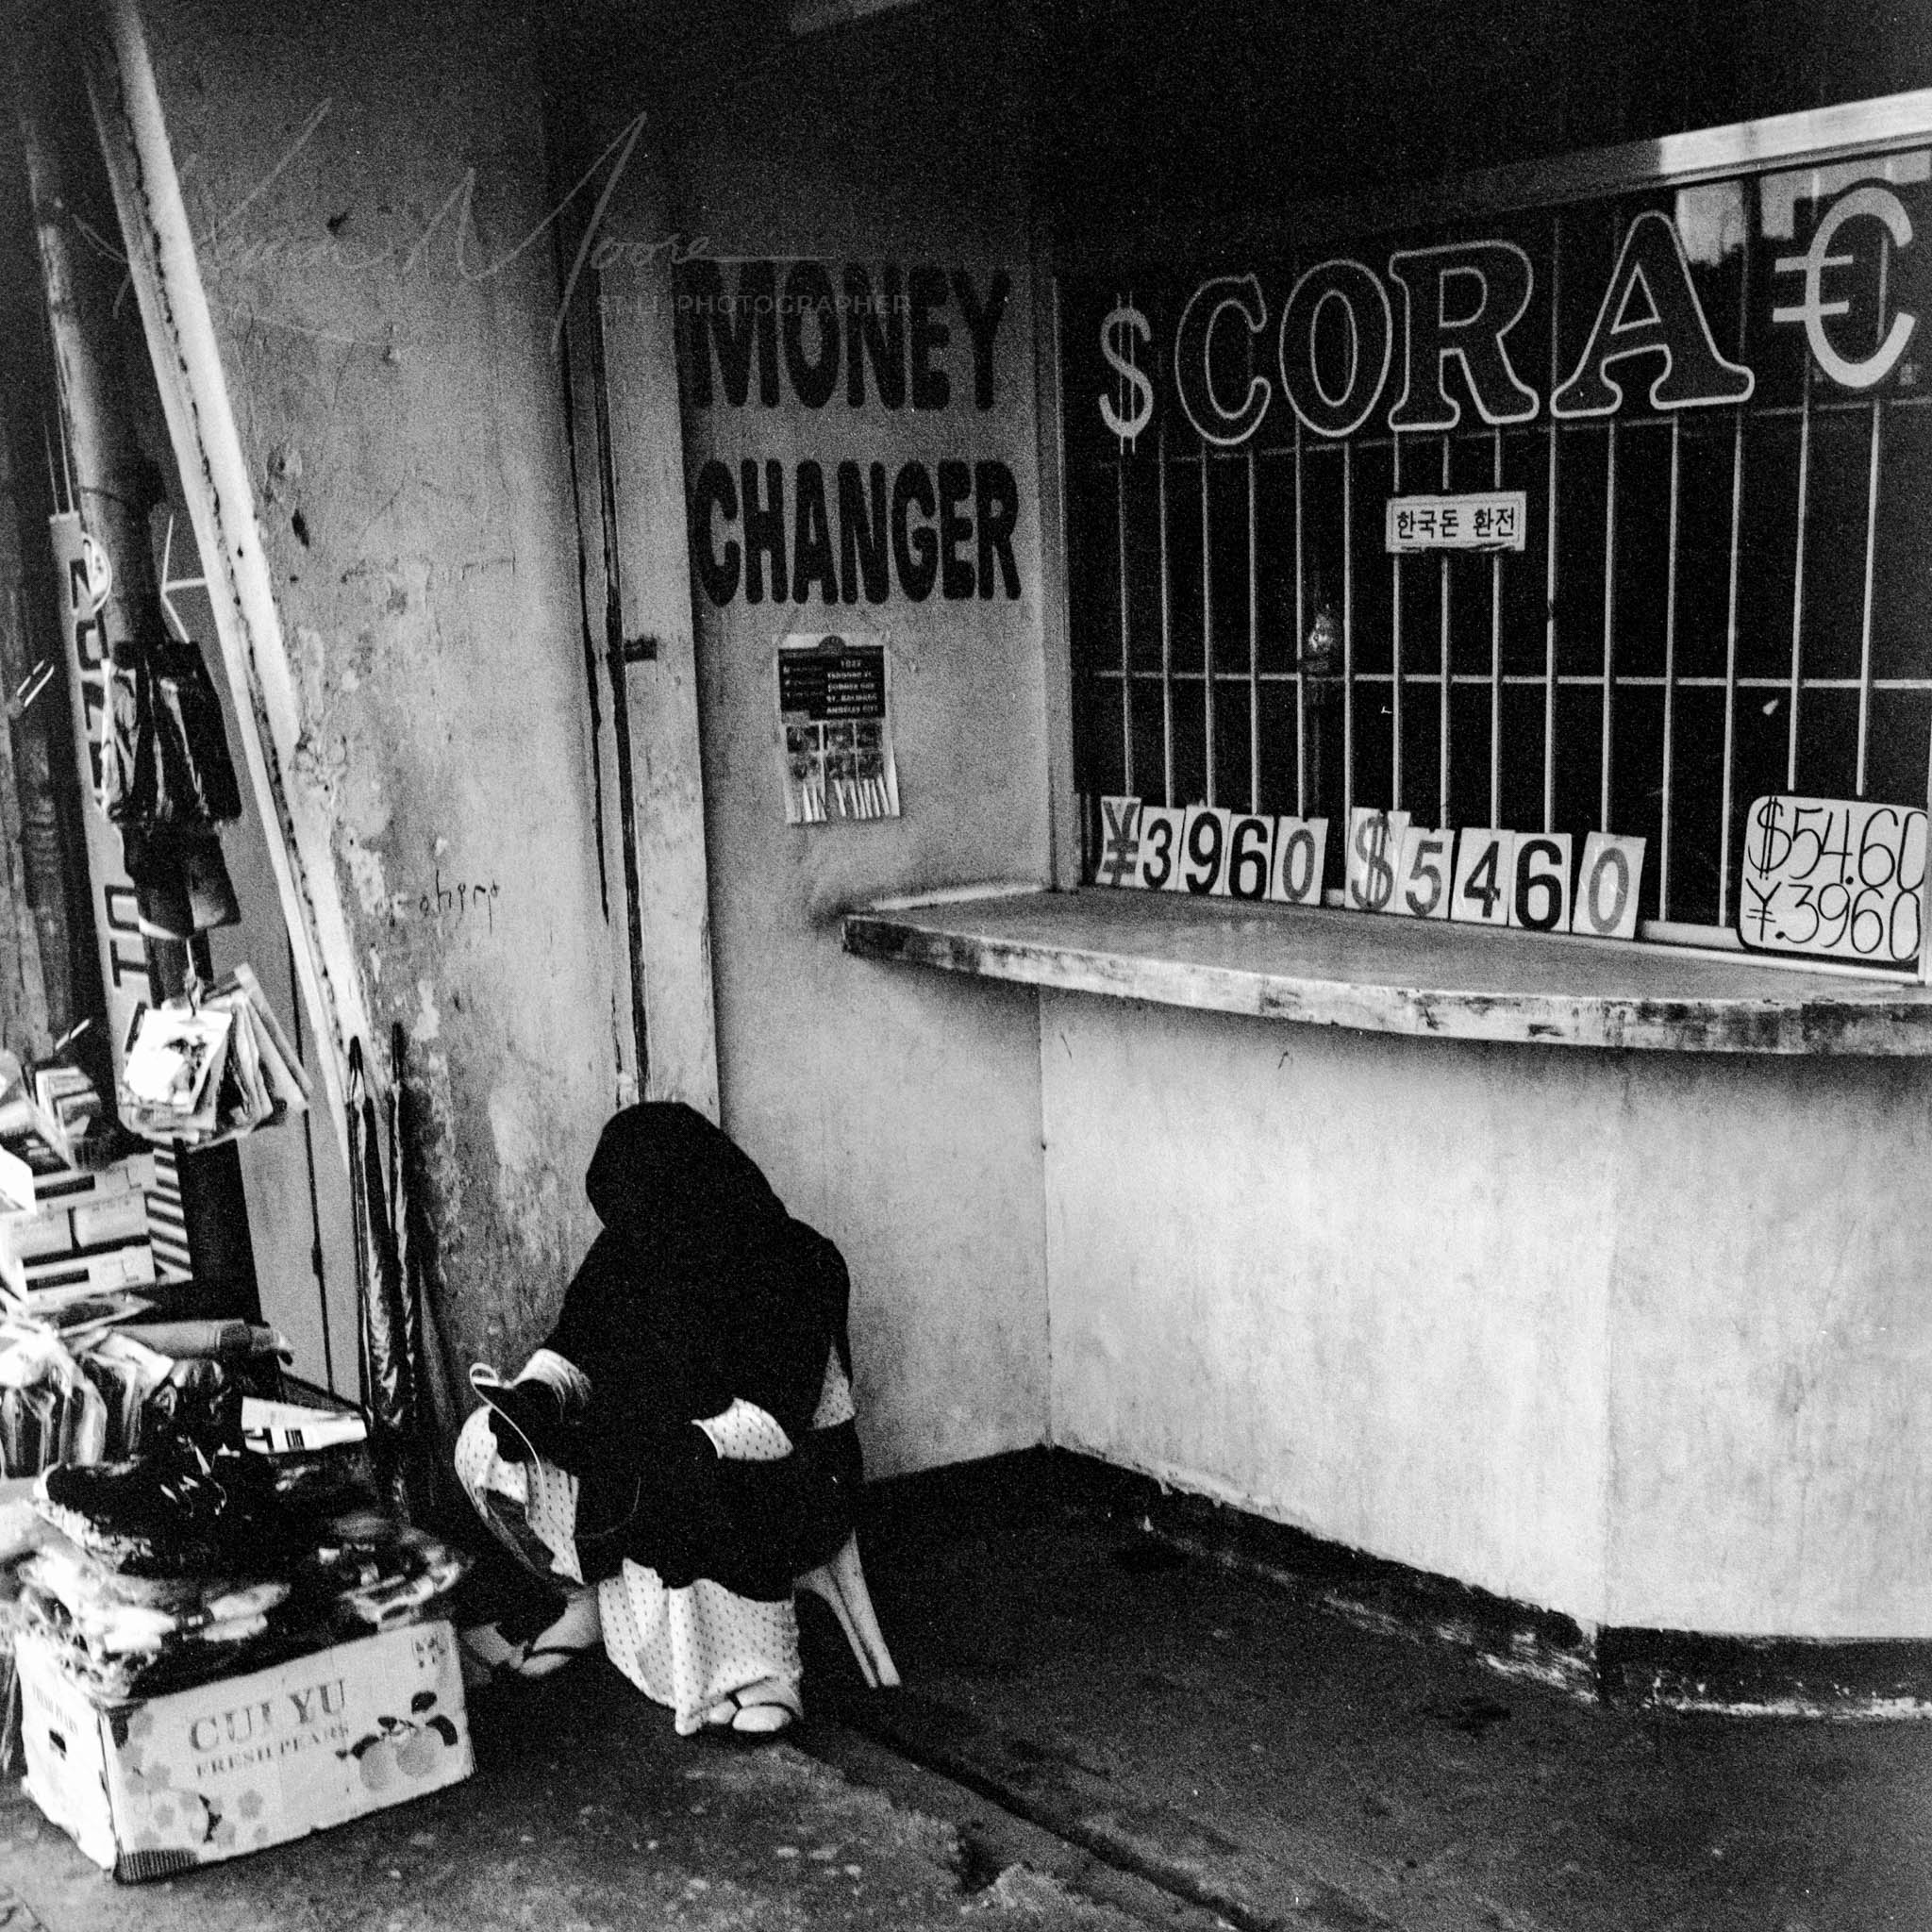 Unattended Money Exchange Booth and Homeless Person in Urban Setting